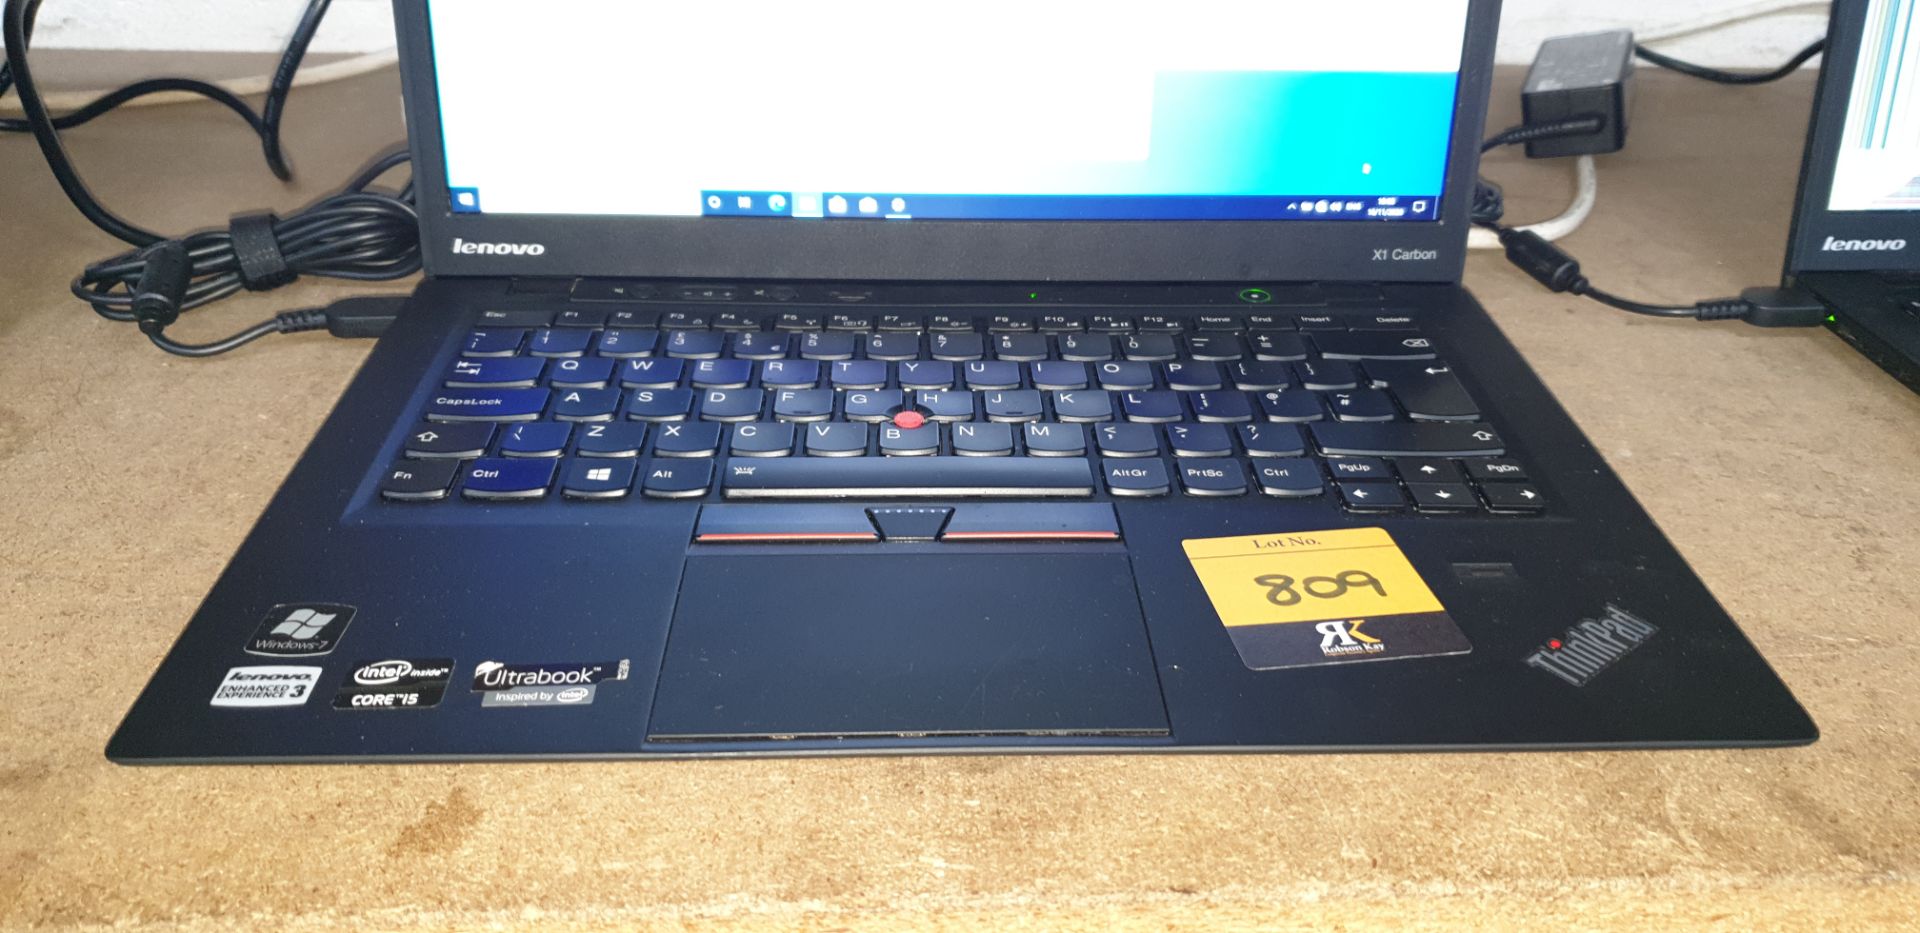 Lenovo notebook Thinkpad X1 Carbon I5-4300, 4Gb, 128Gb SSD, 13.3" Includes charger - Image 2 of 9